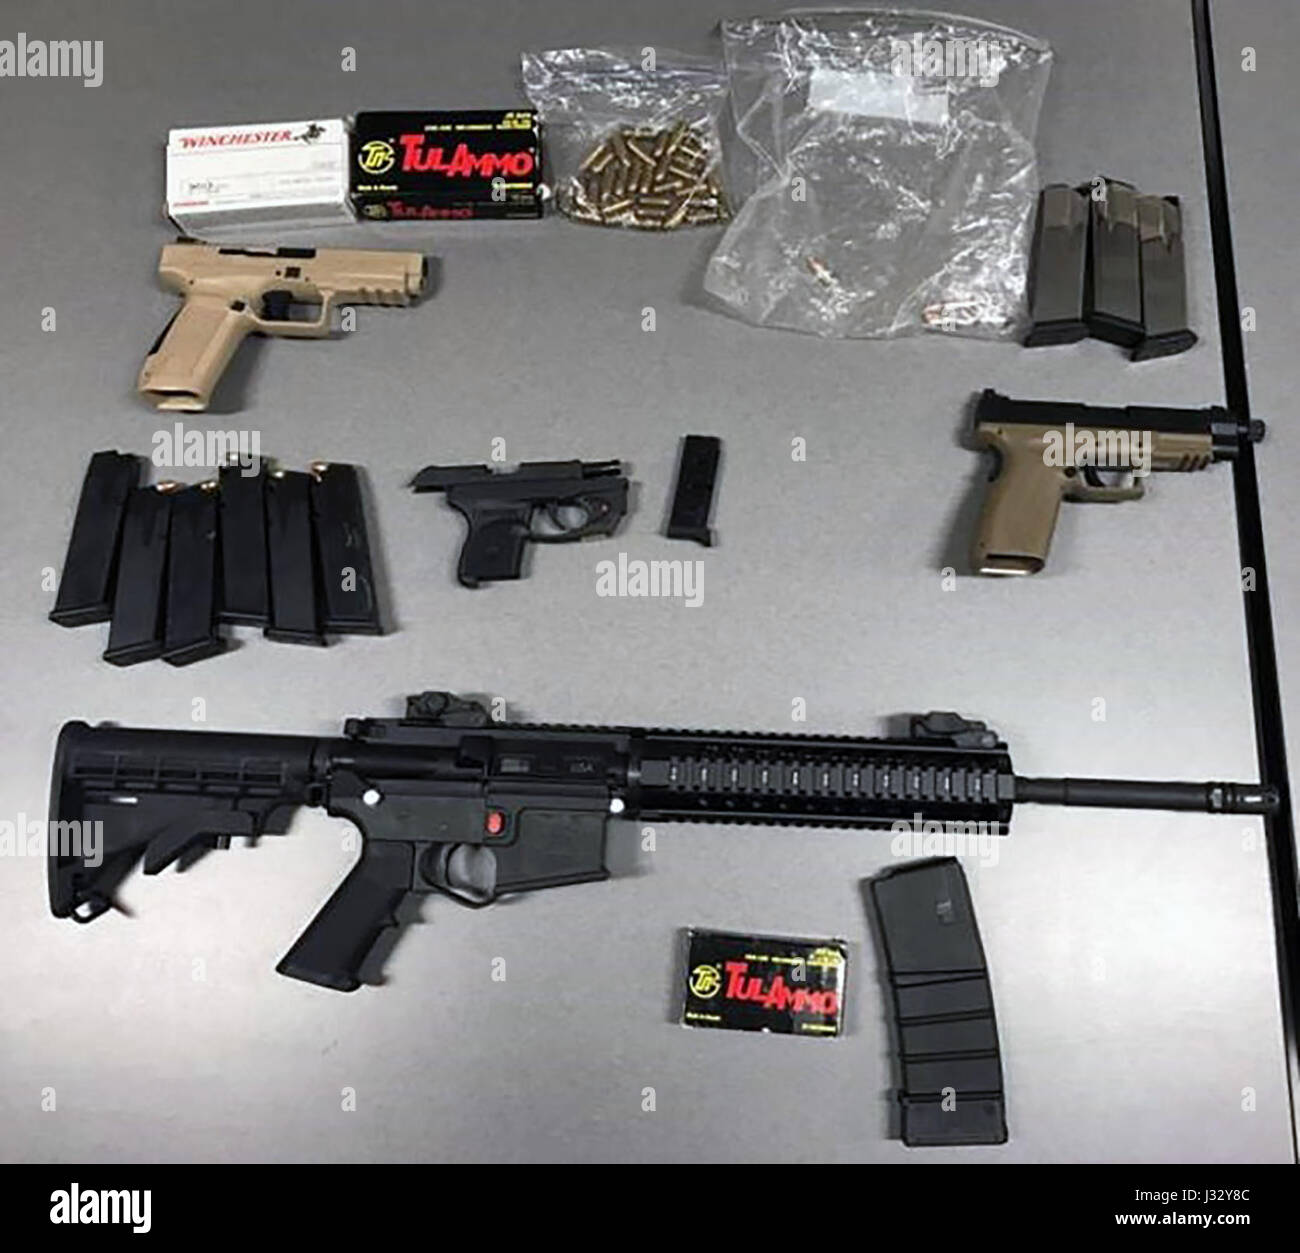 020317: SAN DIEGO - U.S. Customs and Border Protection, Border Patrol agents arrested a U.S. citizen they said was in possession of guns and more than 200 rounds of ammunition. Agents seized three semi-automatic handguns, one of which had a high-capacity magazine, an AR-15-style rifle, and more than 200 rounds of ammunition and multiple high-capacity magazines, several of which were loaded. The man is currently being held in Department of Homeland Security custody and faces state charges for non-compliant firearms and high-capacity magazines. Photo provided by U.S. Customs and Border Protectio Stock Photo